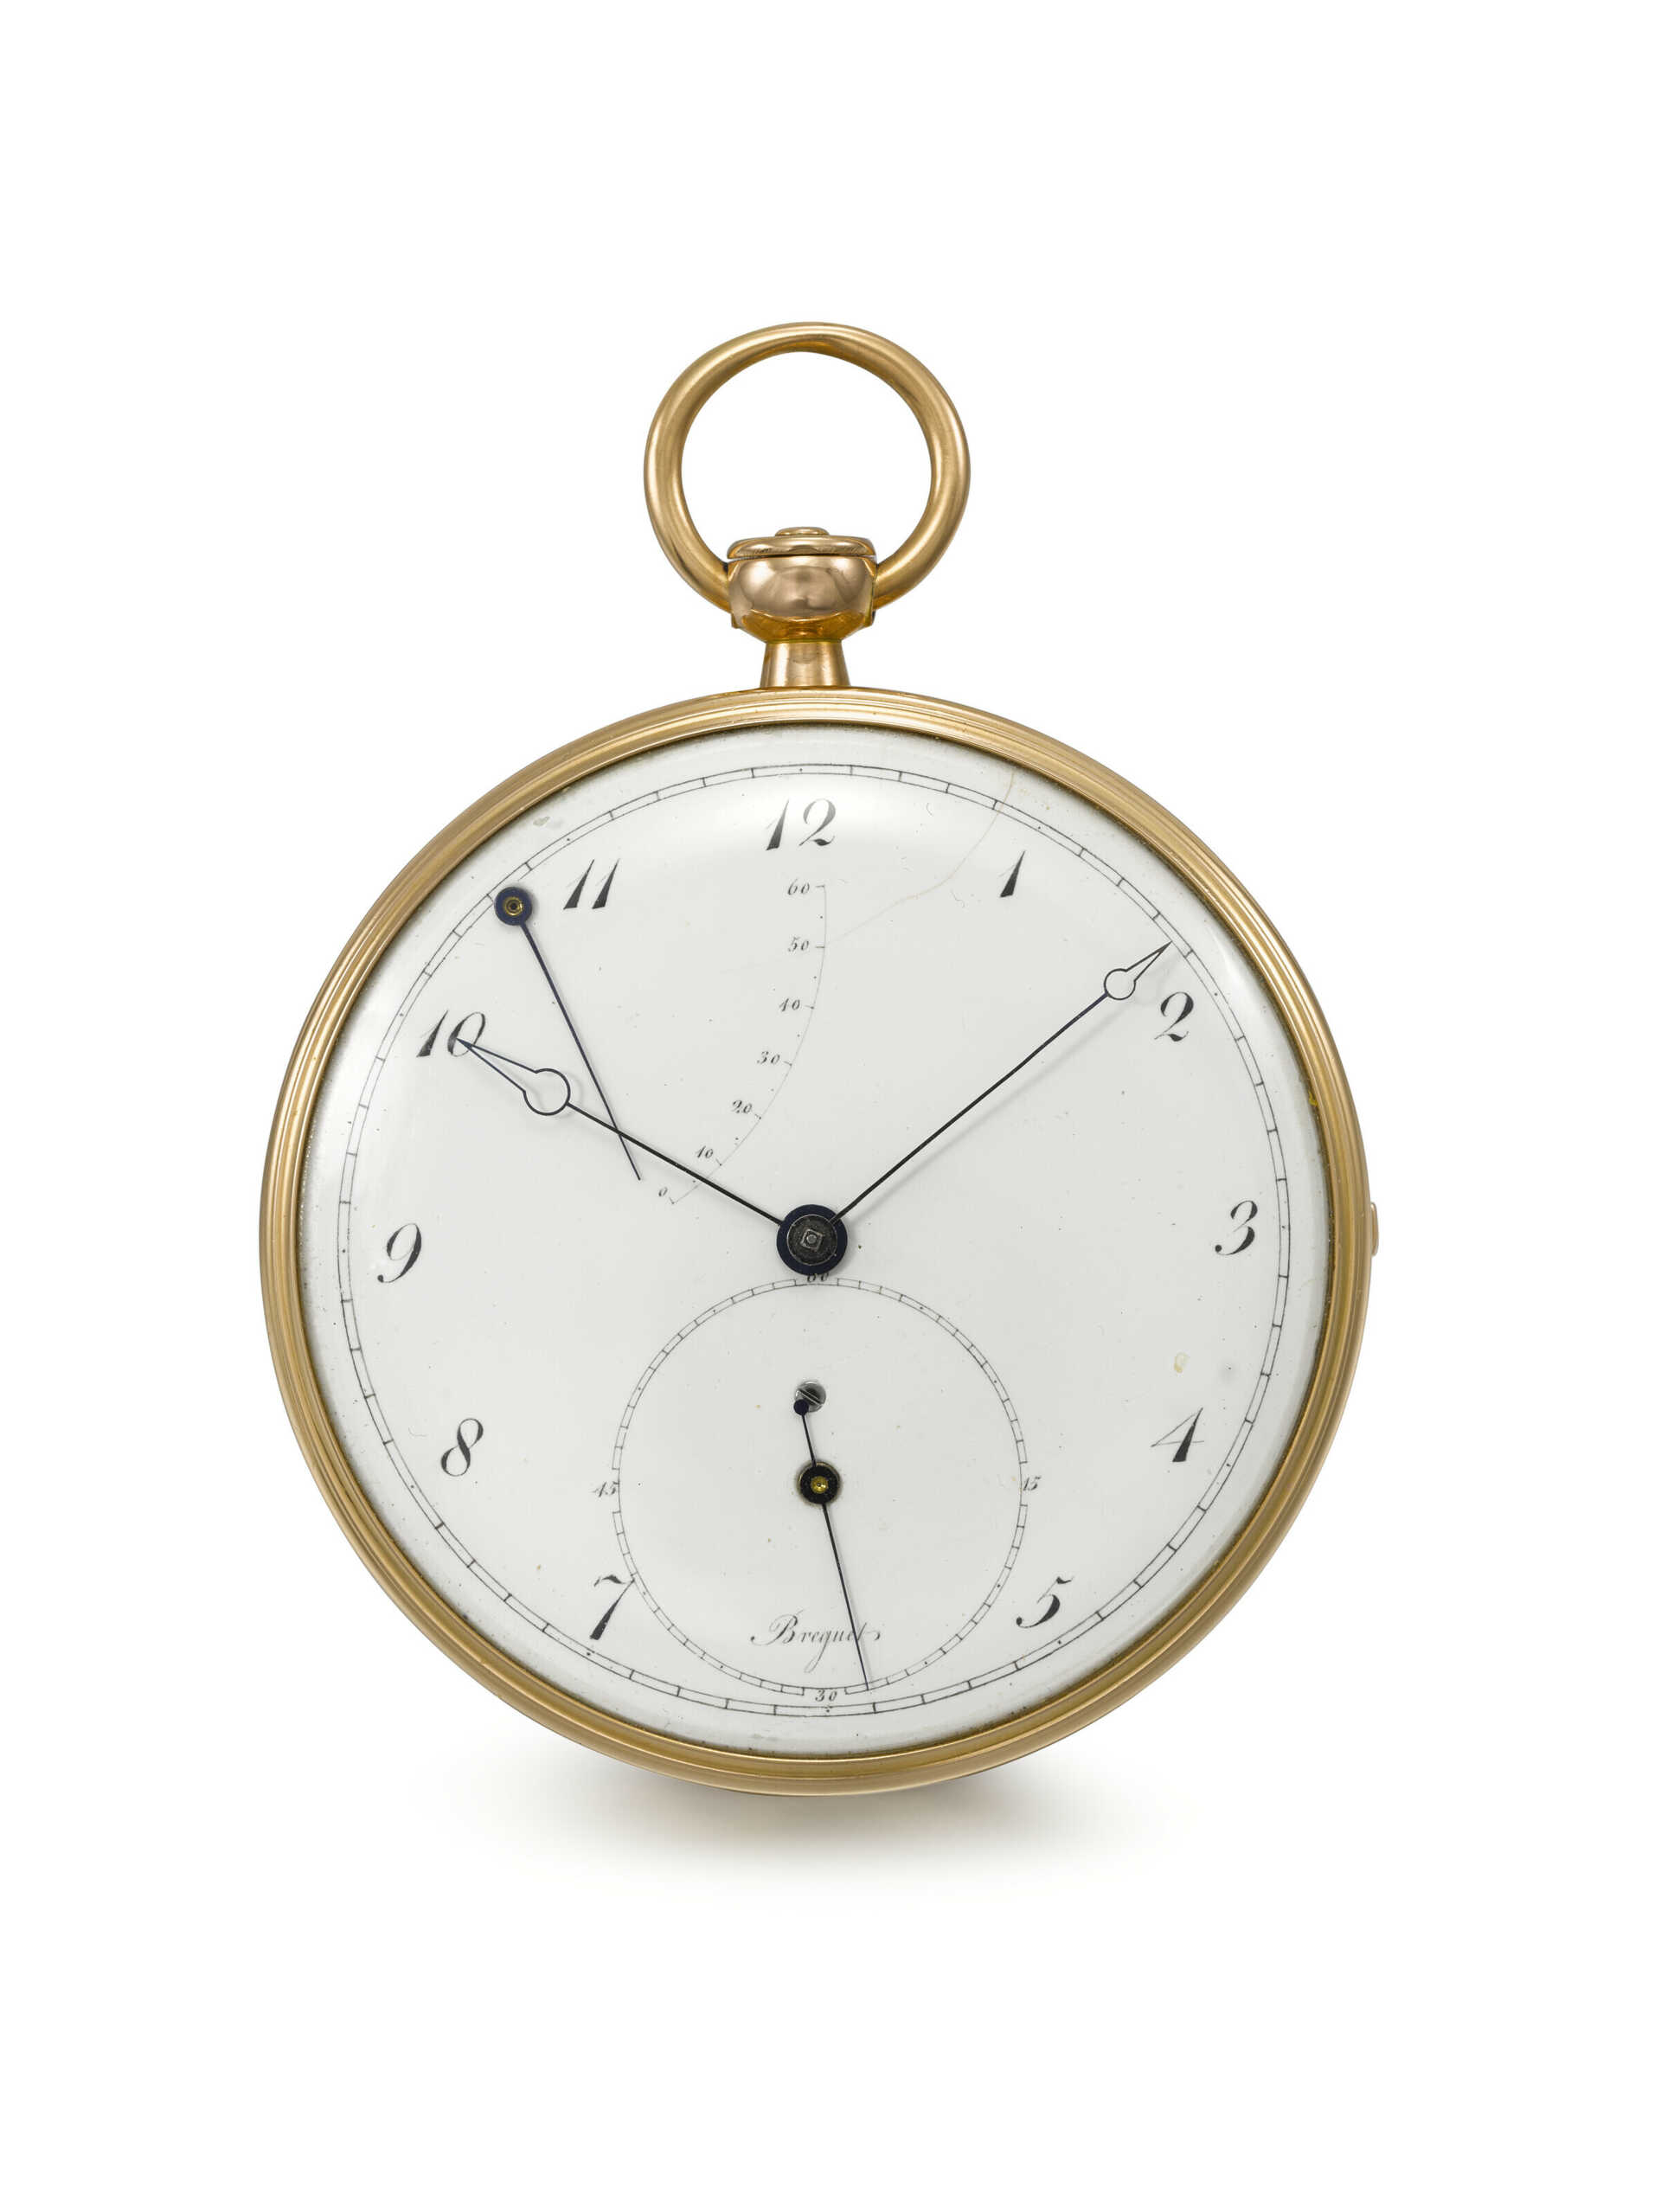 BREGUET, NO. 47 6/87 &#39;MONTRE PERP&#201;TUELLE &#192; R&#201;P&#201;TITION, &#201;CHAPPEMENT LIBRE &#192; ANCRE&#39;. AN EXCEPTIONAL AND HISTORICALLY IMPORTANT, LARGE 18K GOLD SELF-WINDING MINUTE REPEATING ON GONG, HOURS AND QUARTERS &#192; TOC POCKET 